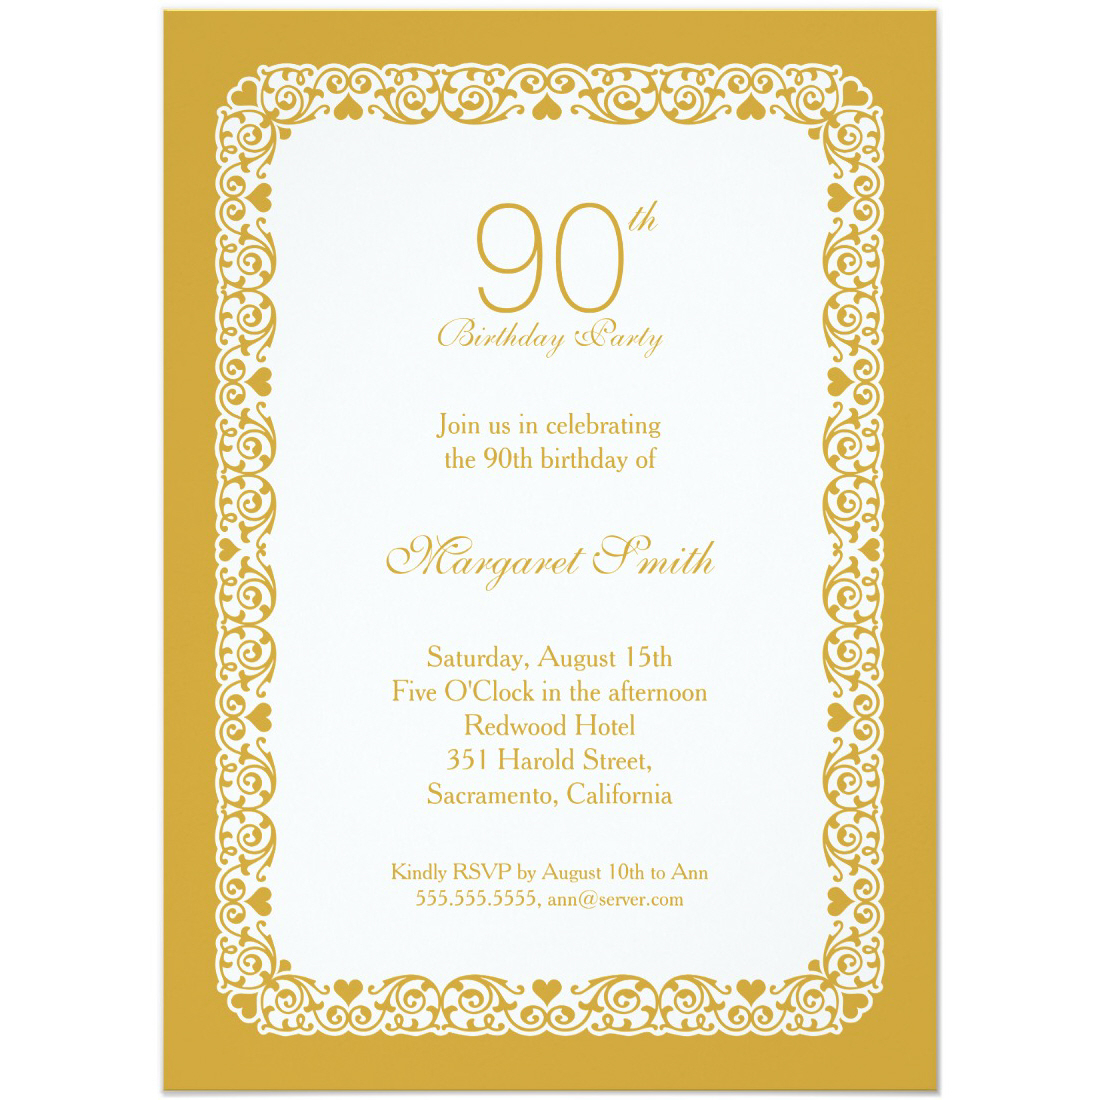 90th Birthday Party Invitations Templates Business Template Ideas